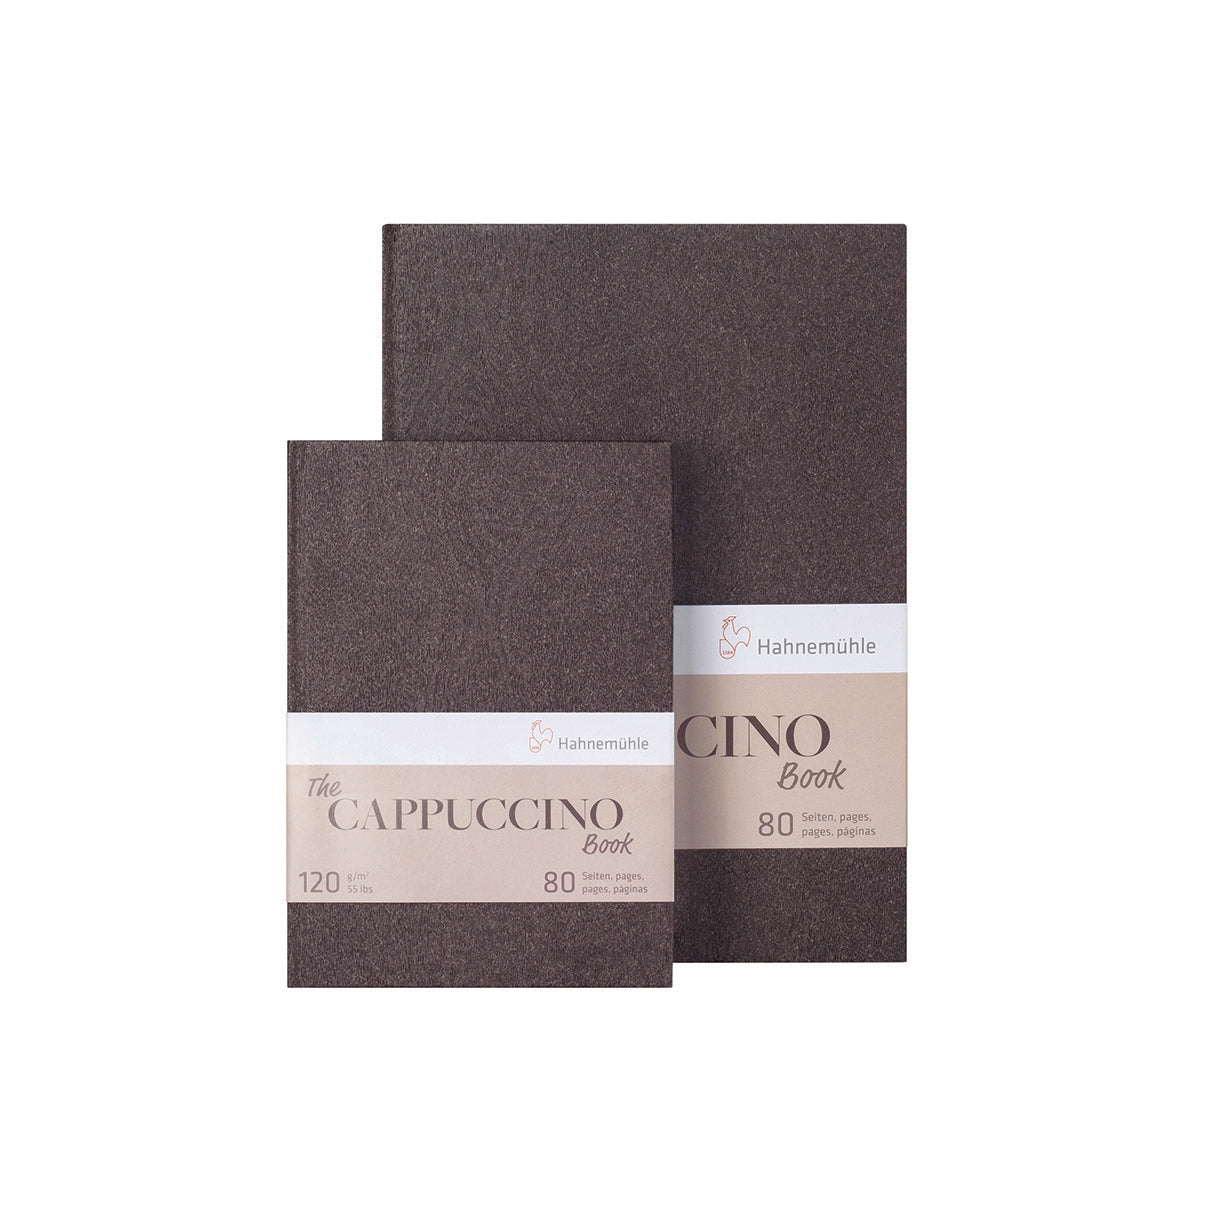 Hahnemuhle The Cappuccino Book - Melbourne Etching Supplies